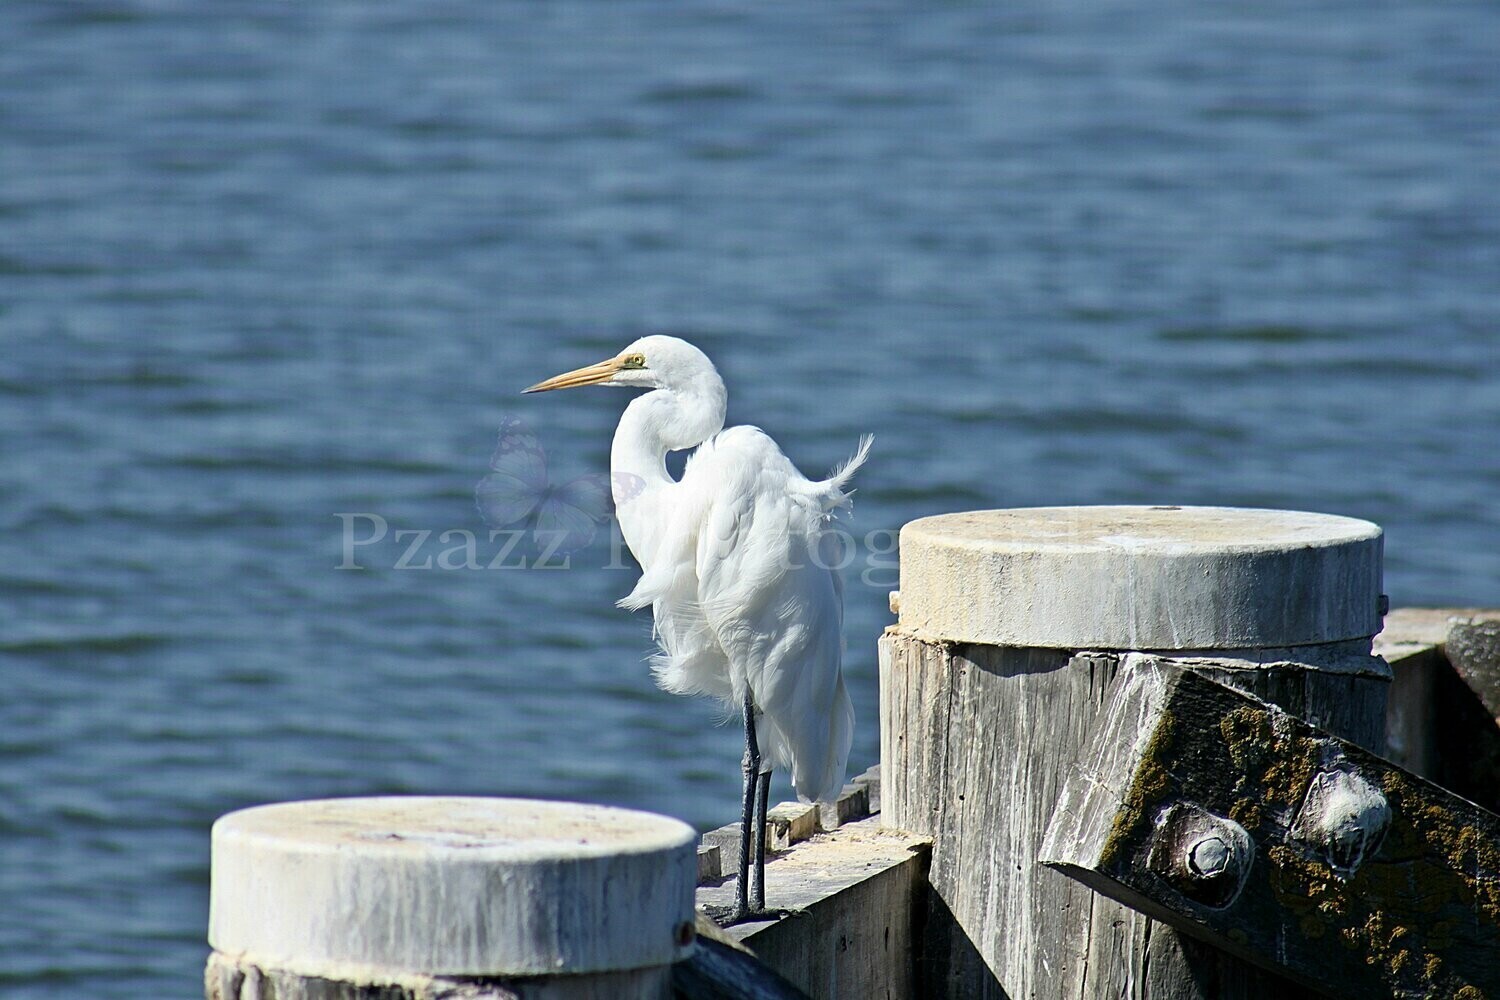 Pzazz Photography - Egret - Specially ordered for you. Delivery is approximately 4 - 6 weeks.